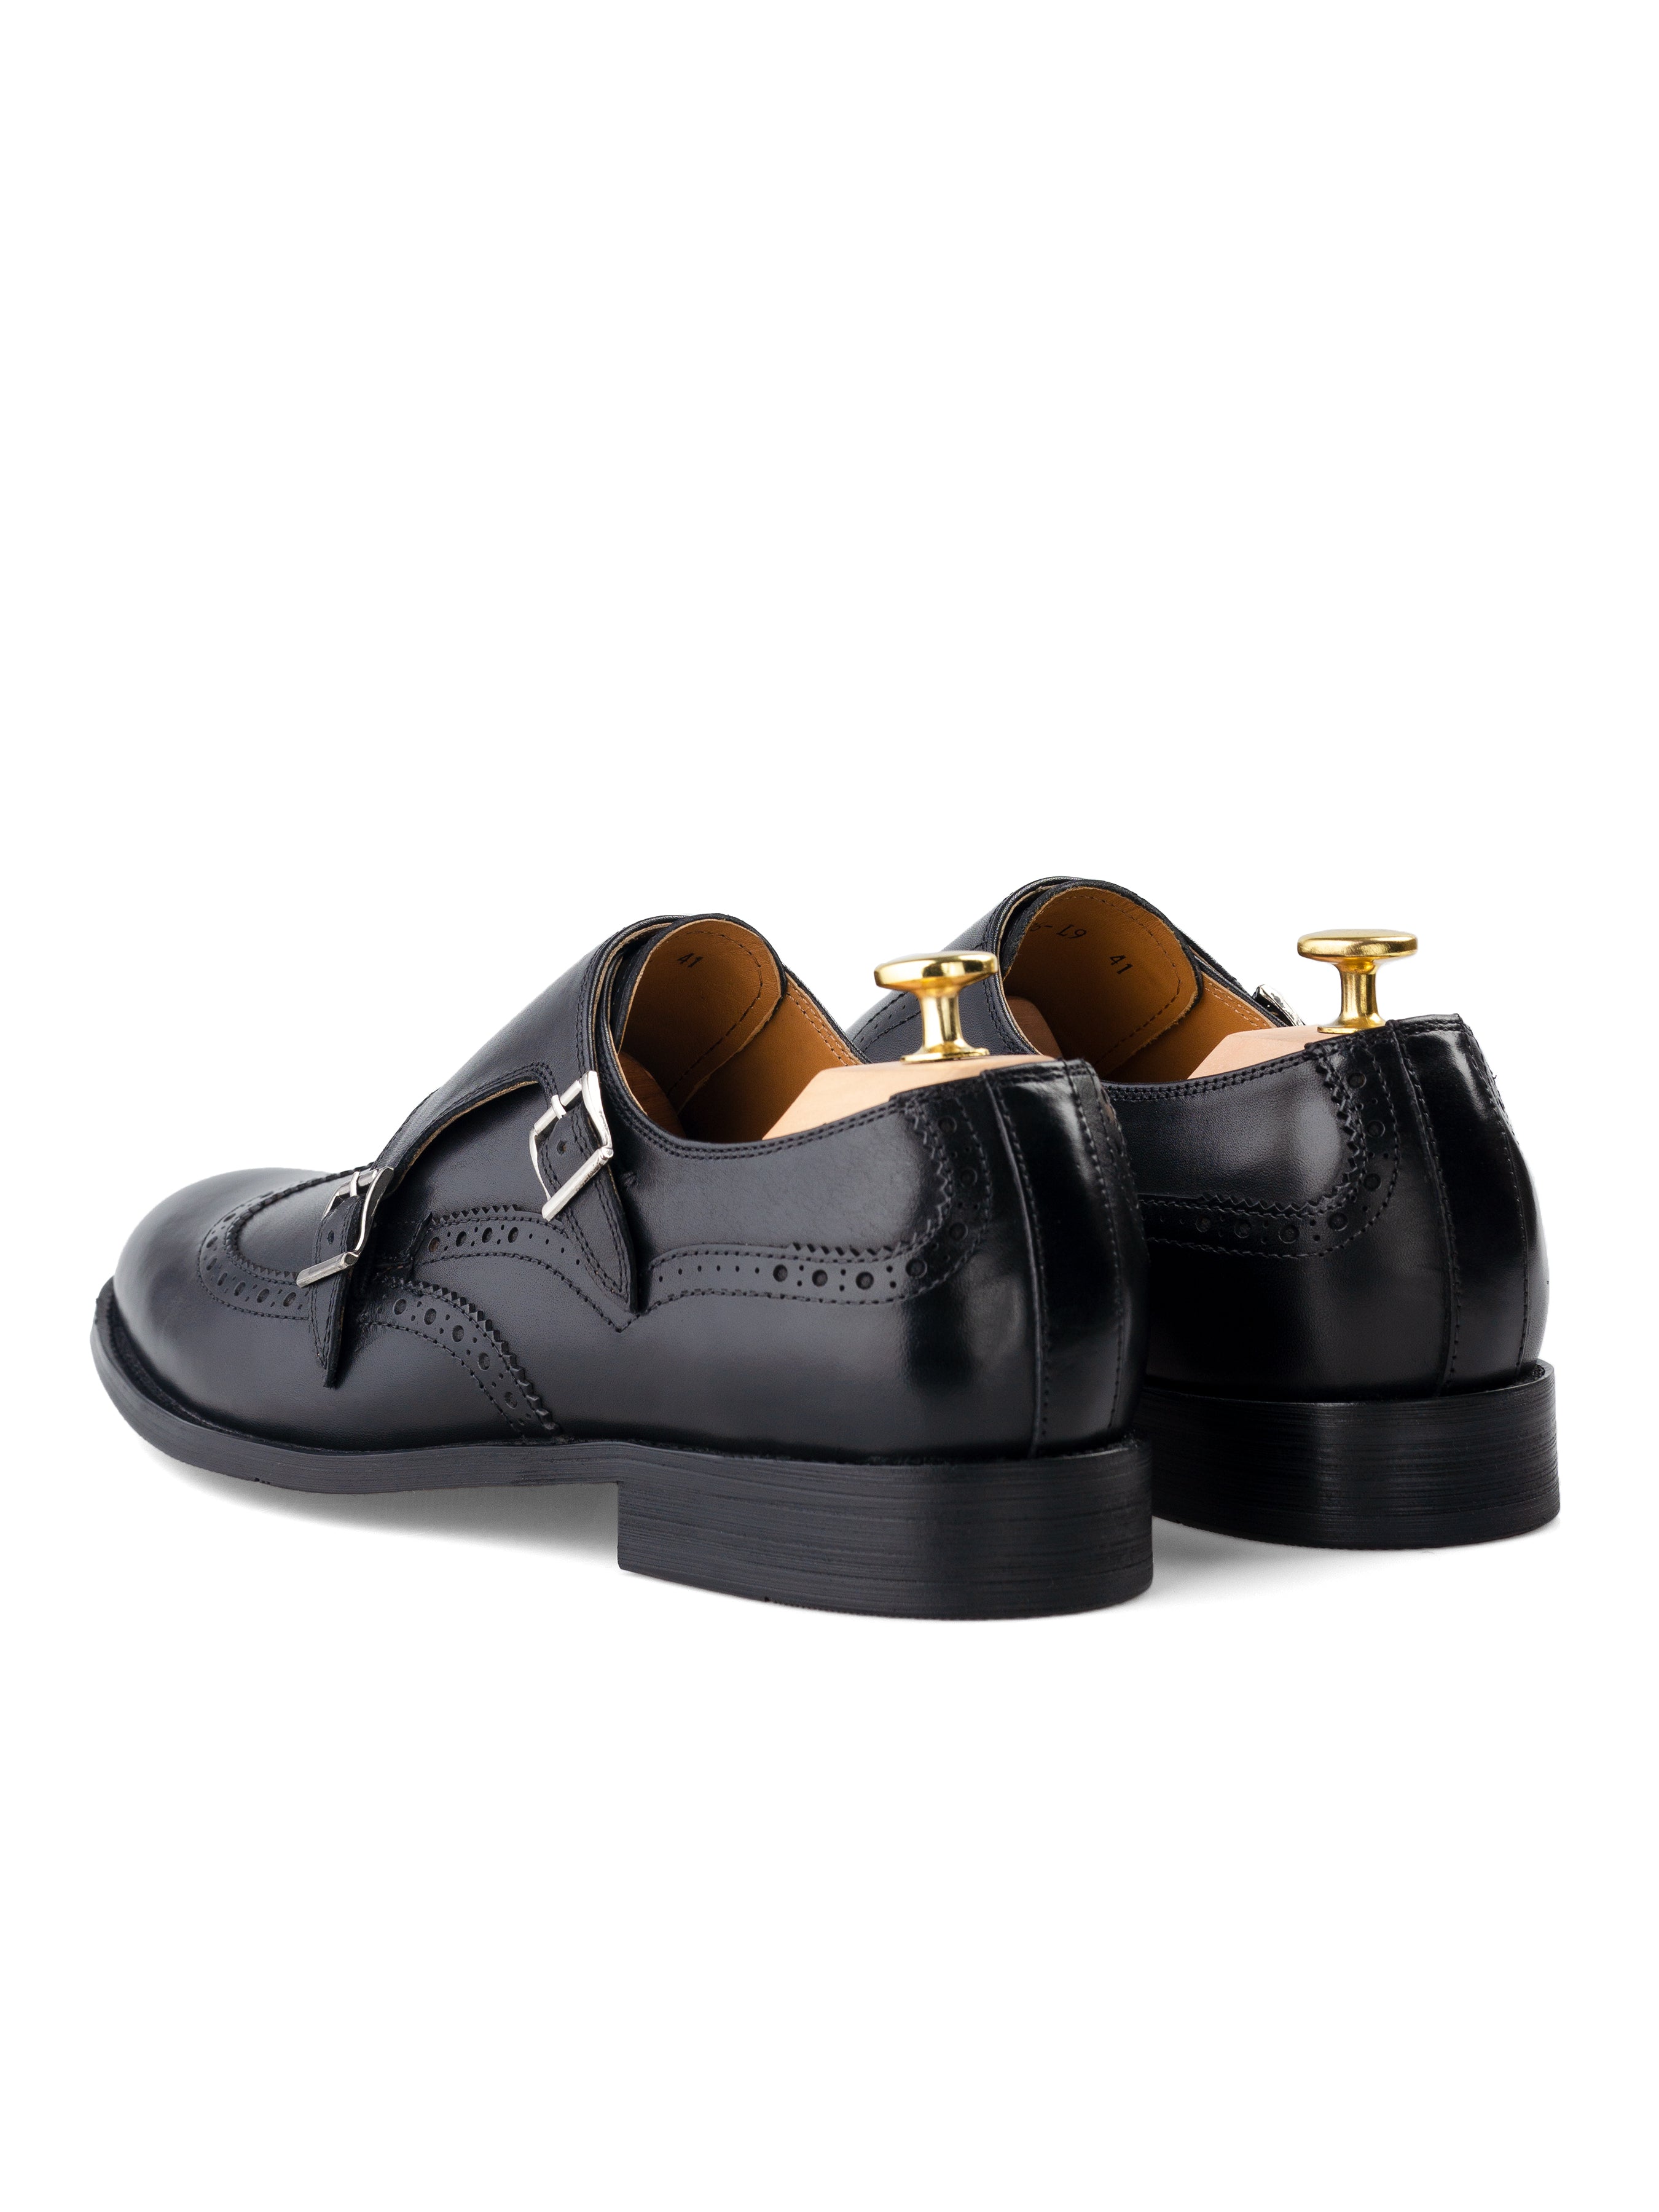 Double Monk Strap Brogue Wingtip - Solid Black (Hand Painted Patina)